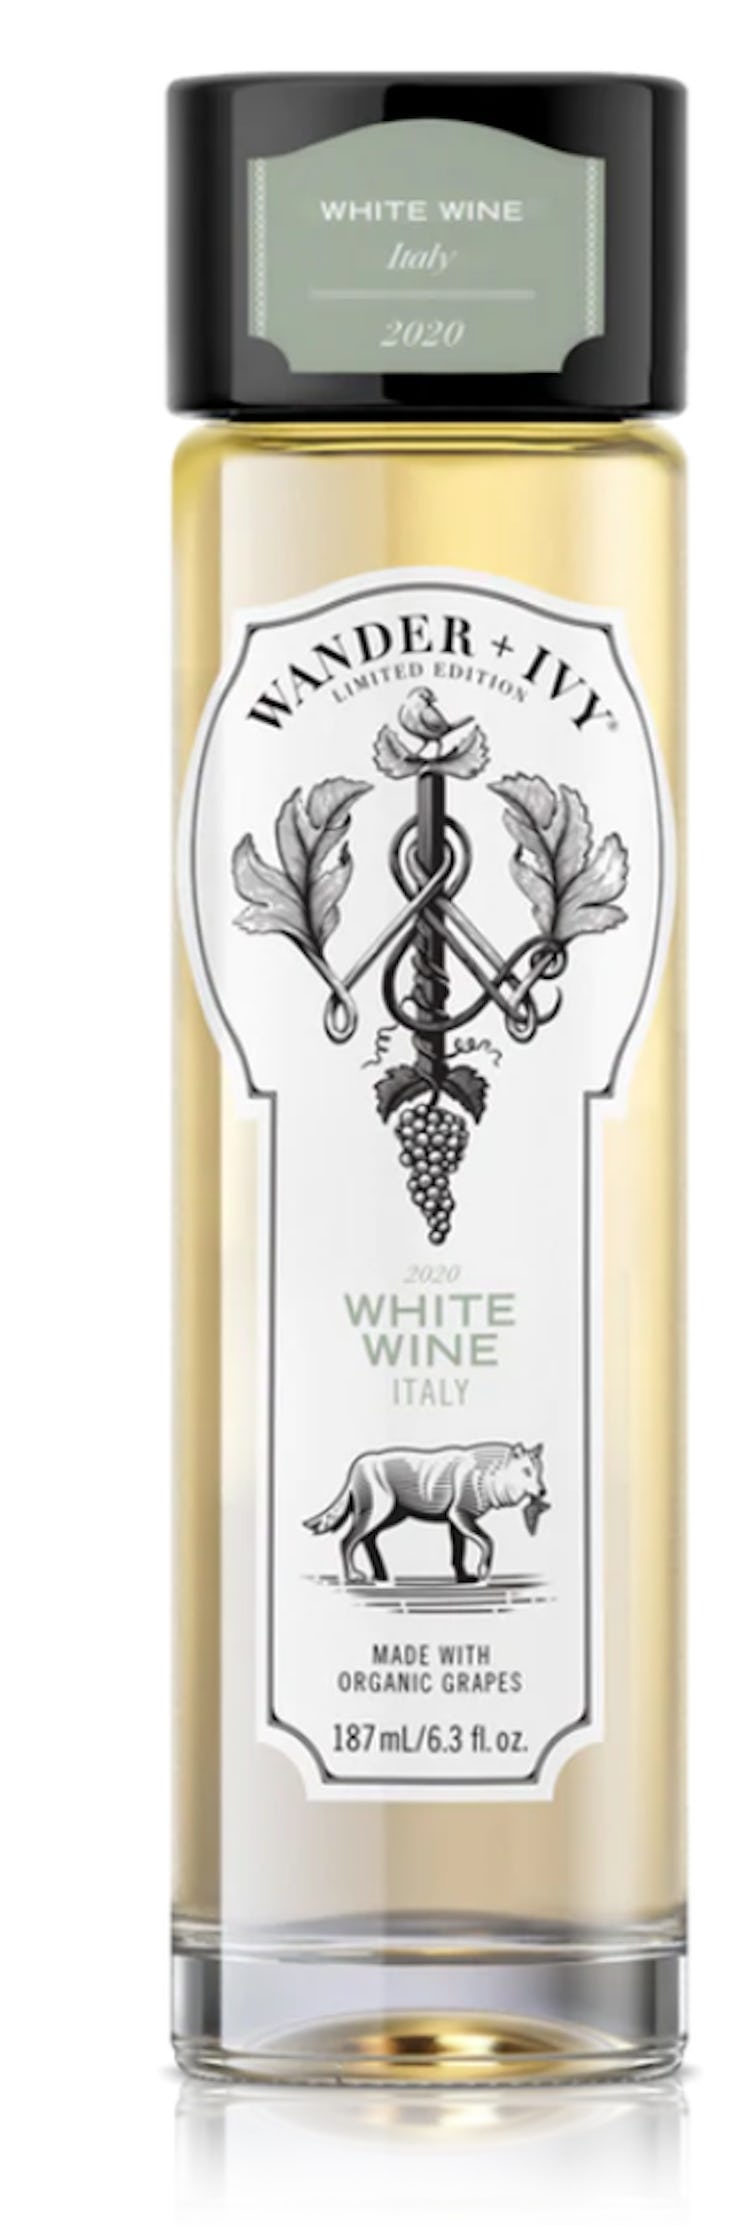 Limited Edition White Wine